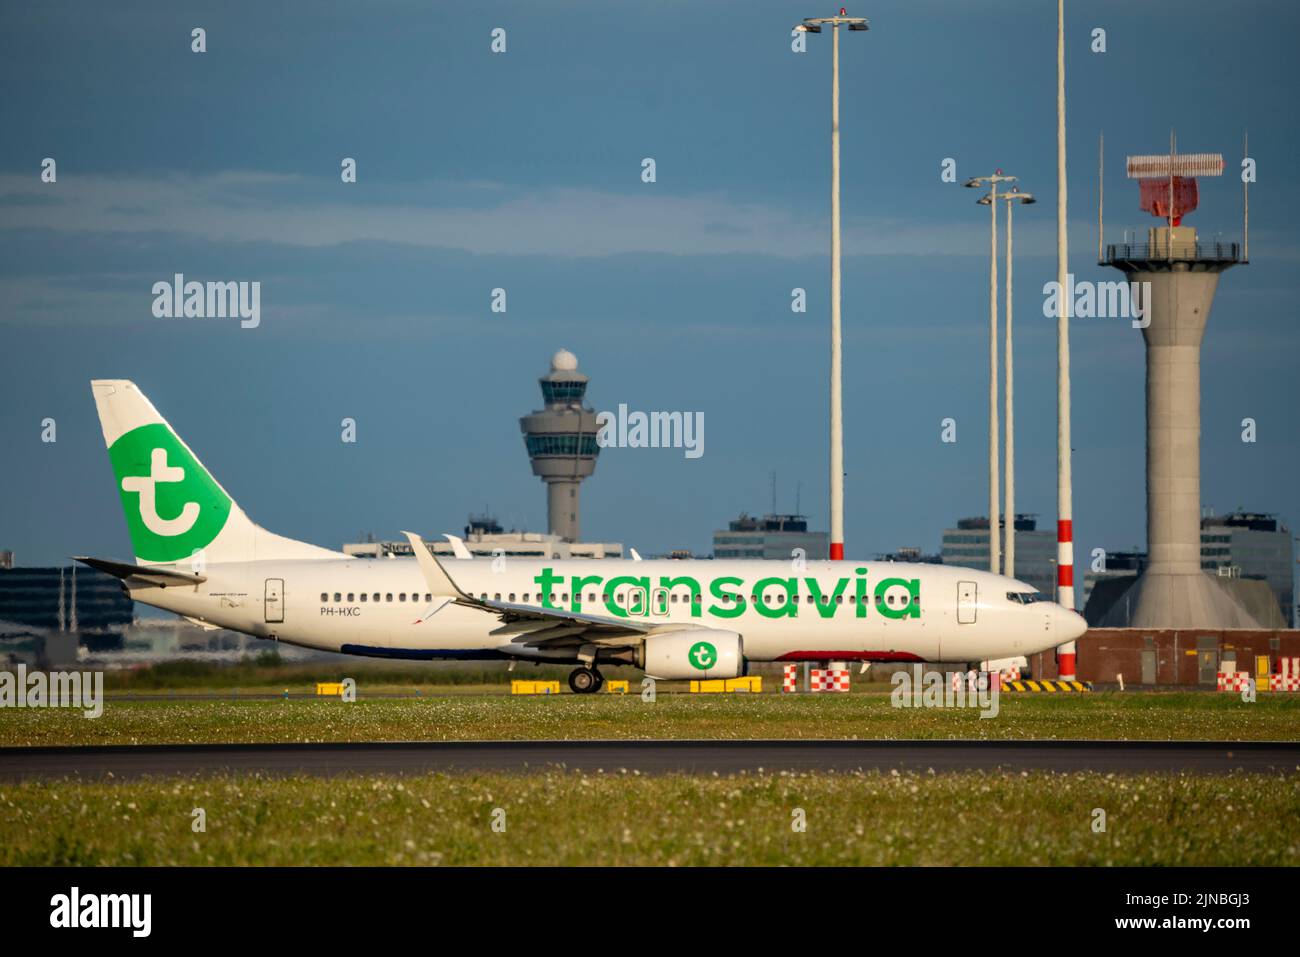 Amsterdam Shiphol Airport, Polderbaan, one of 6 runways, tower air traffic control, on taxiway to take-off, PH-HXC, Transavia Boeing 737-800. Stock Photo